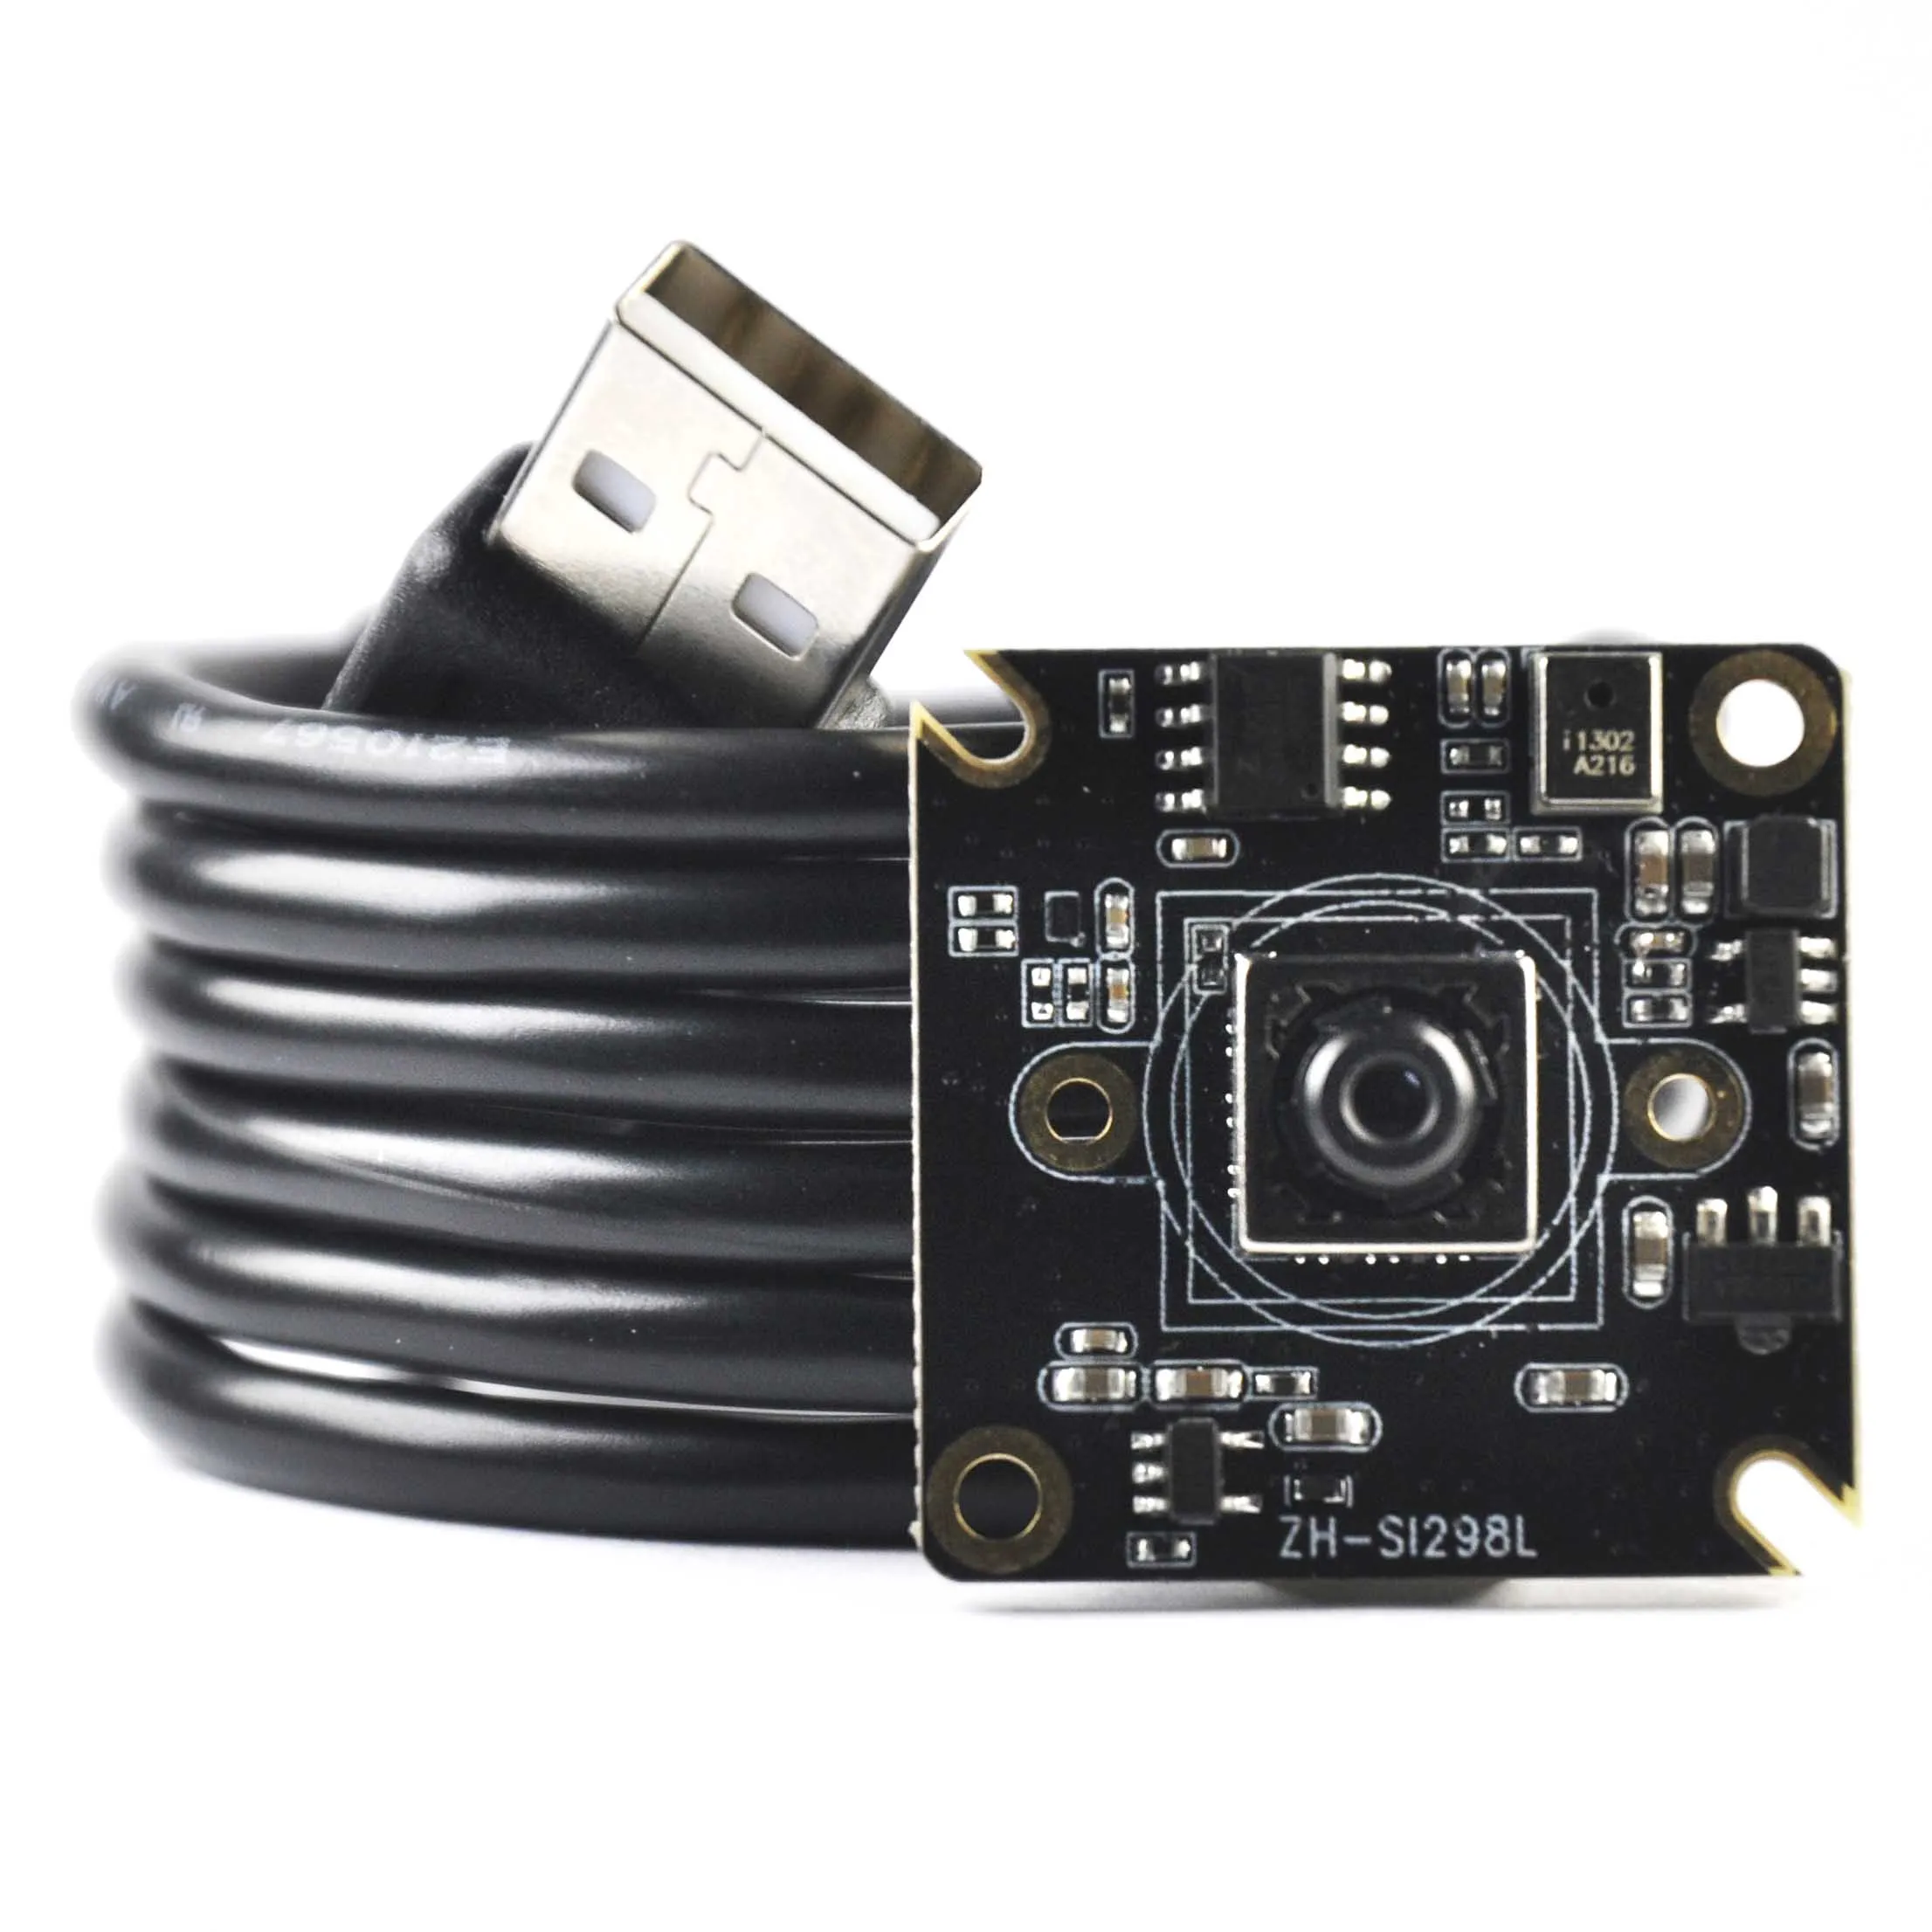 

16MP HD CMOS IMX298 AF 78.4° USB2.0 Camera Module with Digital Mic For Android, Linux, Windows, Mac OSX